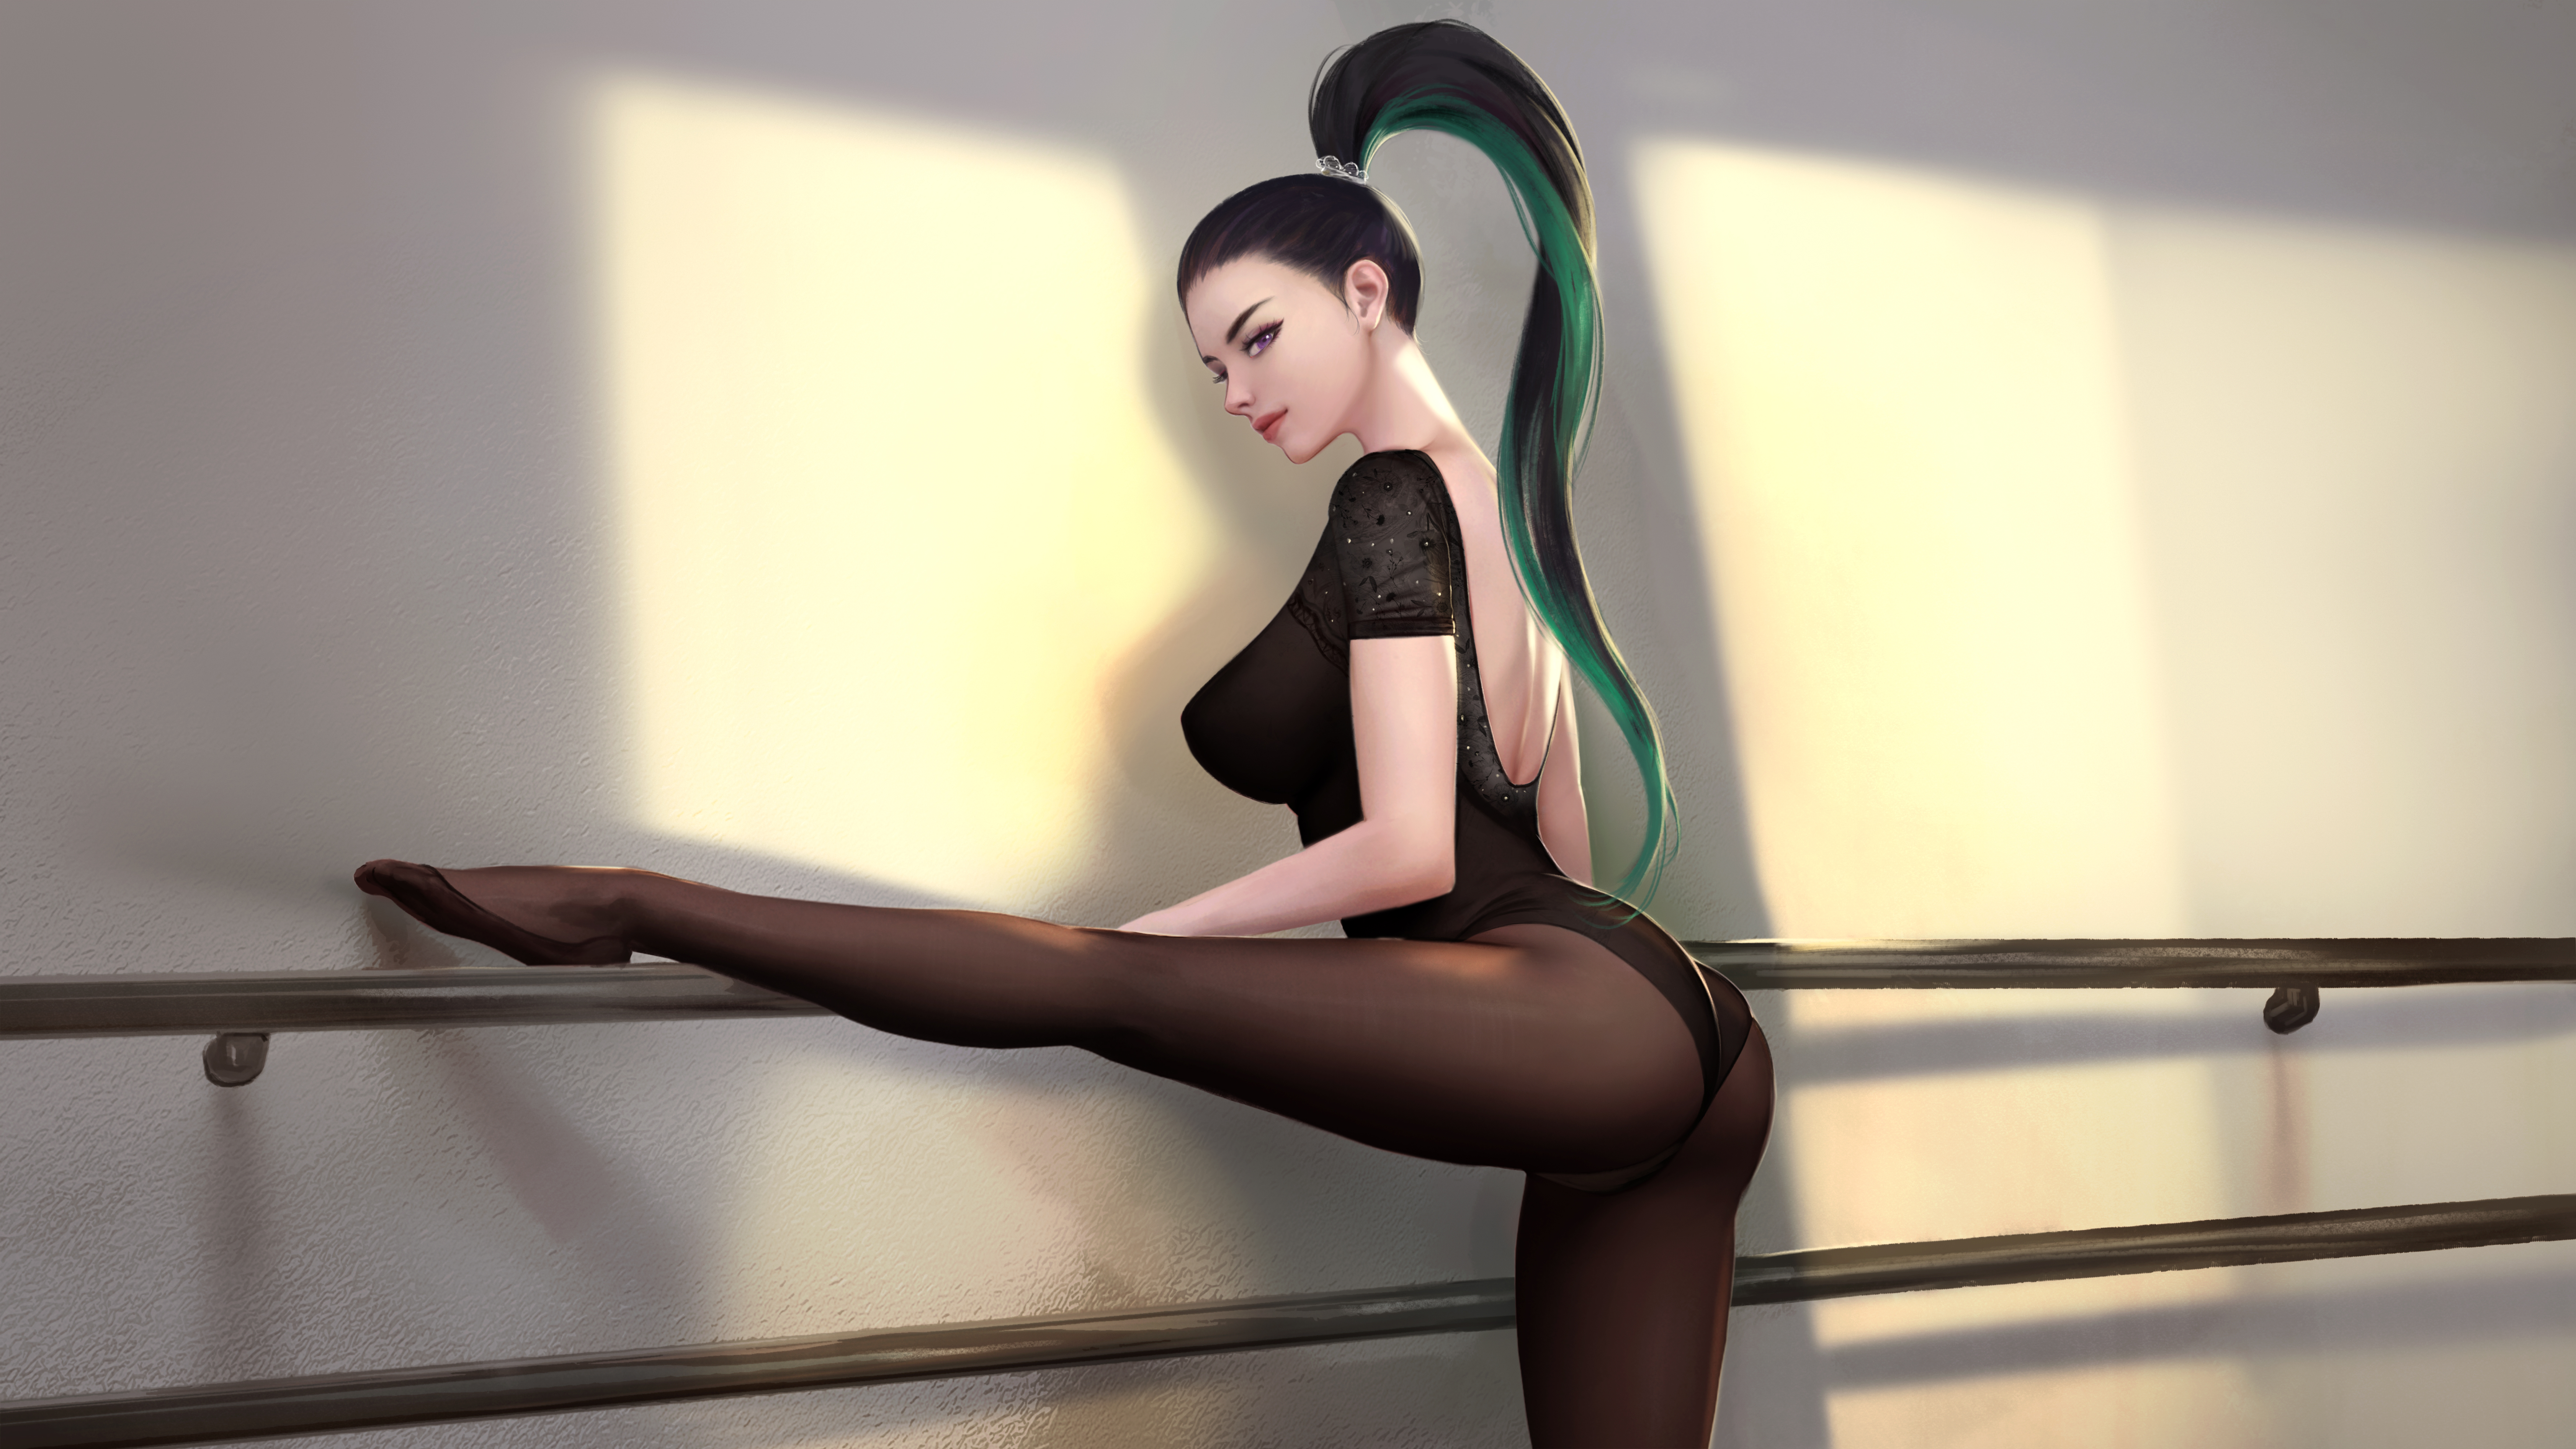 General 7000x3938 Kai'Sa (League of Legends) League of Legends video games video game girls ponytail long hair looking at viewer profile ballerina pointed toes stretching leotard bodysuit pantyhose ballet slippers ass artwork drawing video game characters illustration fan art Firolian